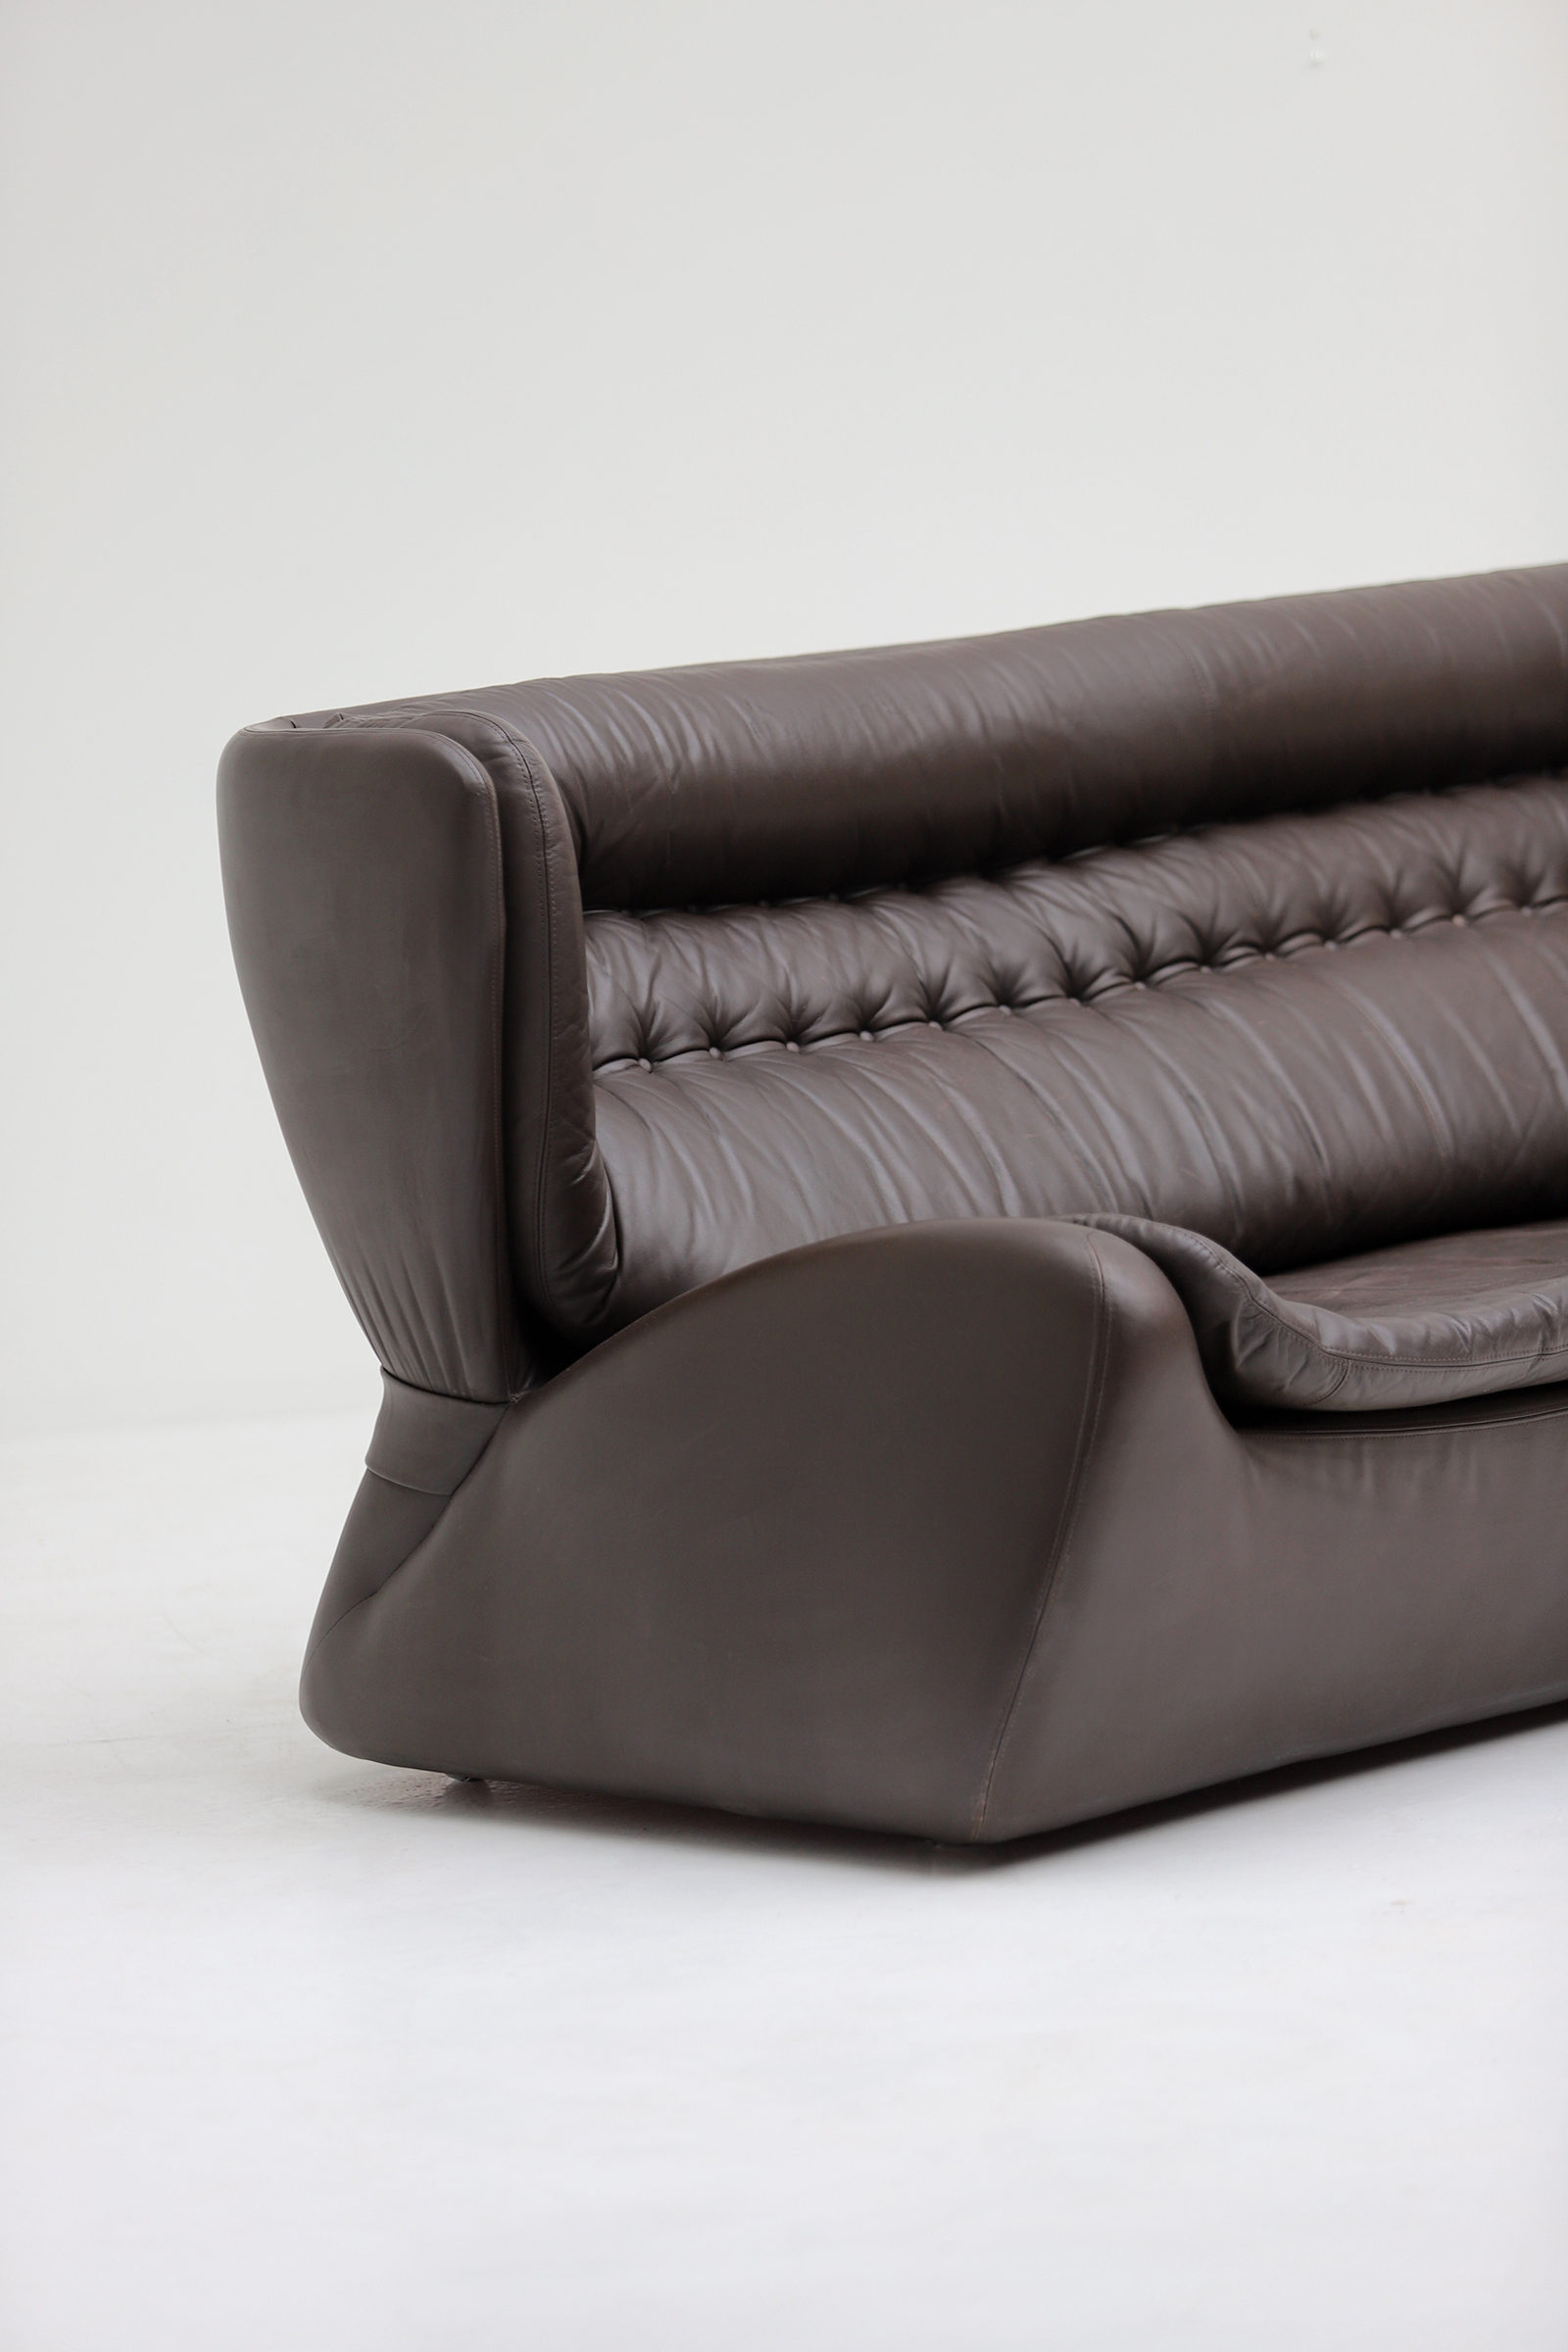 Durlet Brown Leather 'Pacha' Sofa 1970s Space Age image 3